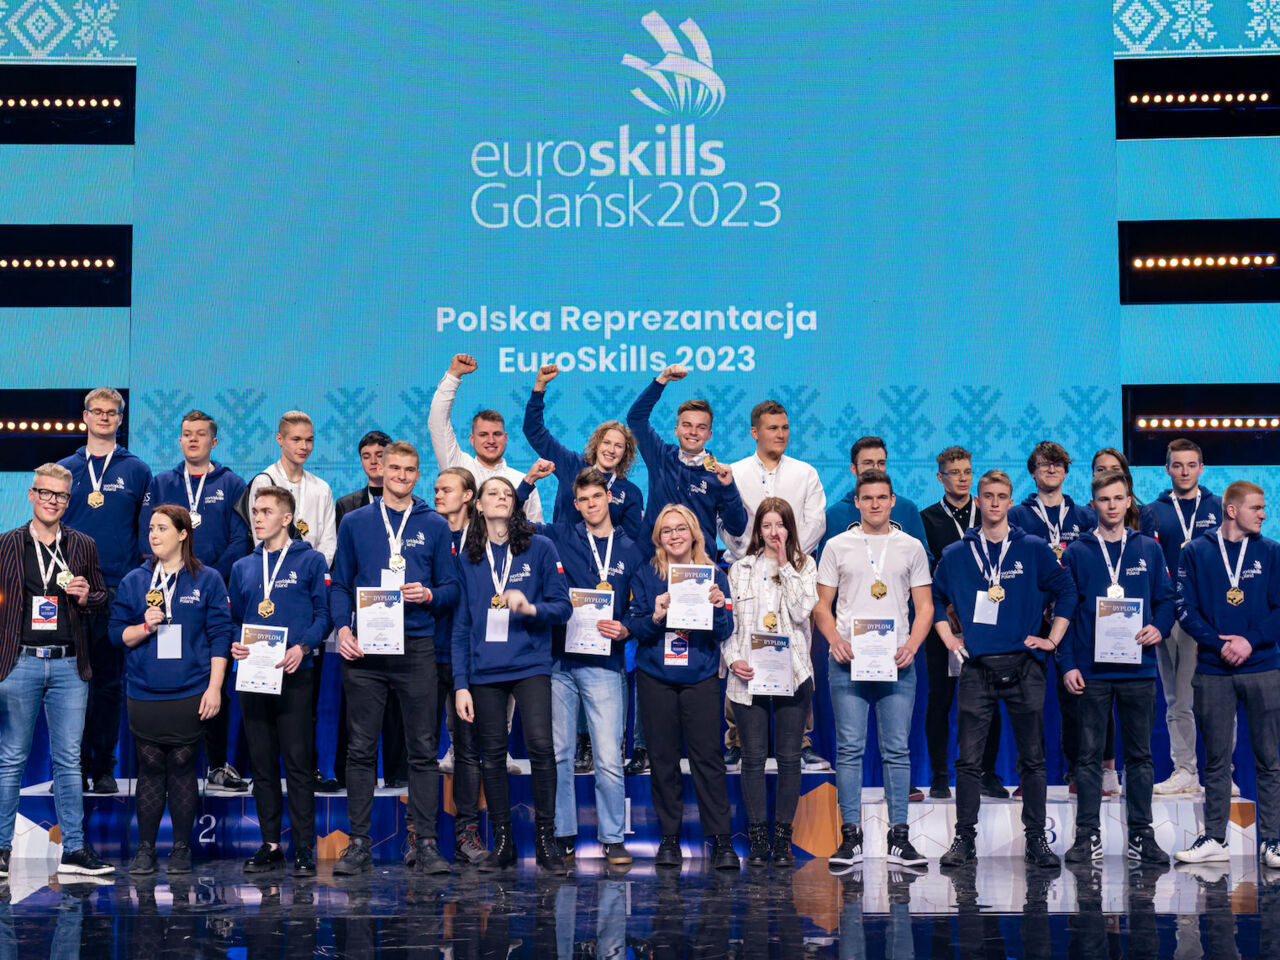 Competitors celebrate on stage at SkillsPoland 2022, which took place in Gdańsk from 23-25 November 2022.
